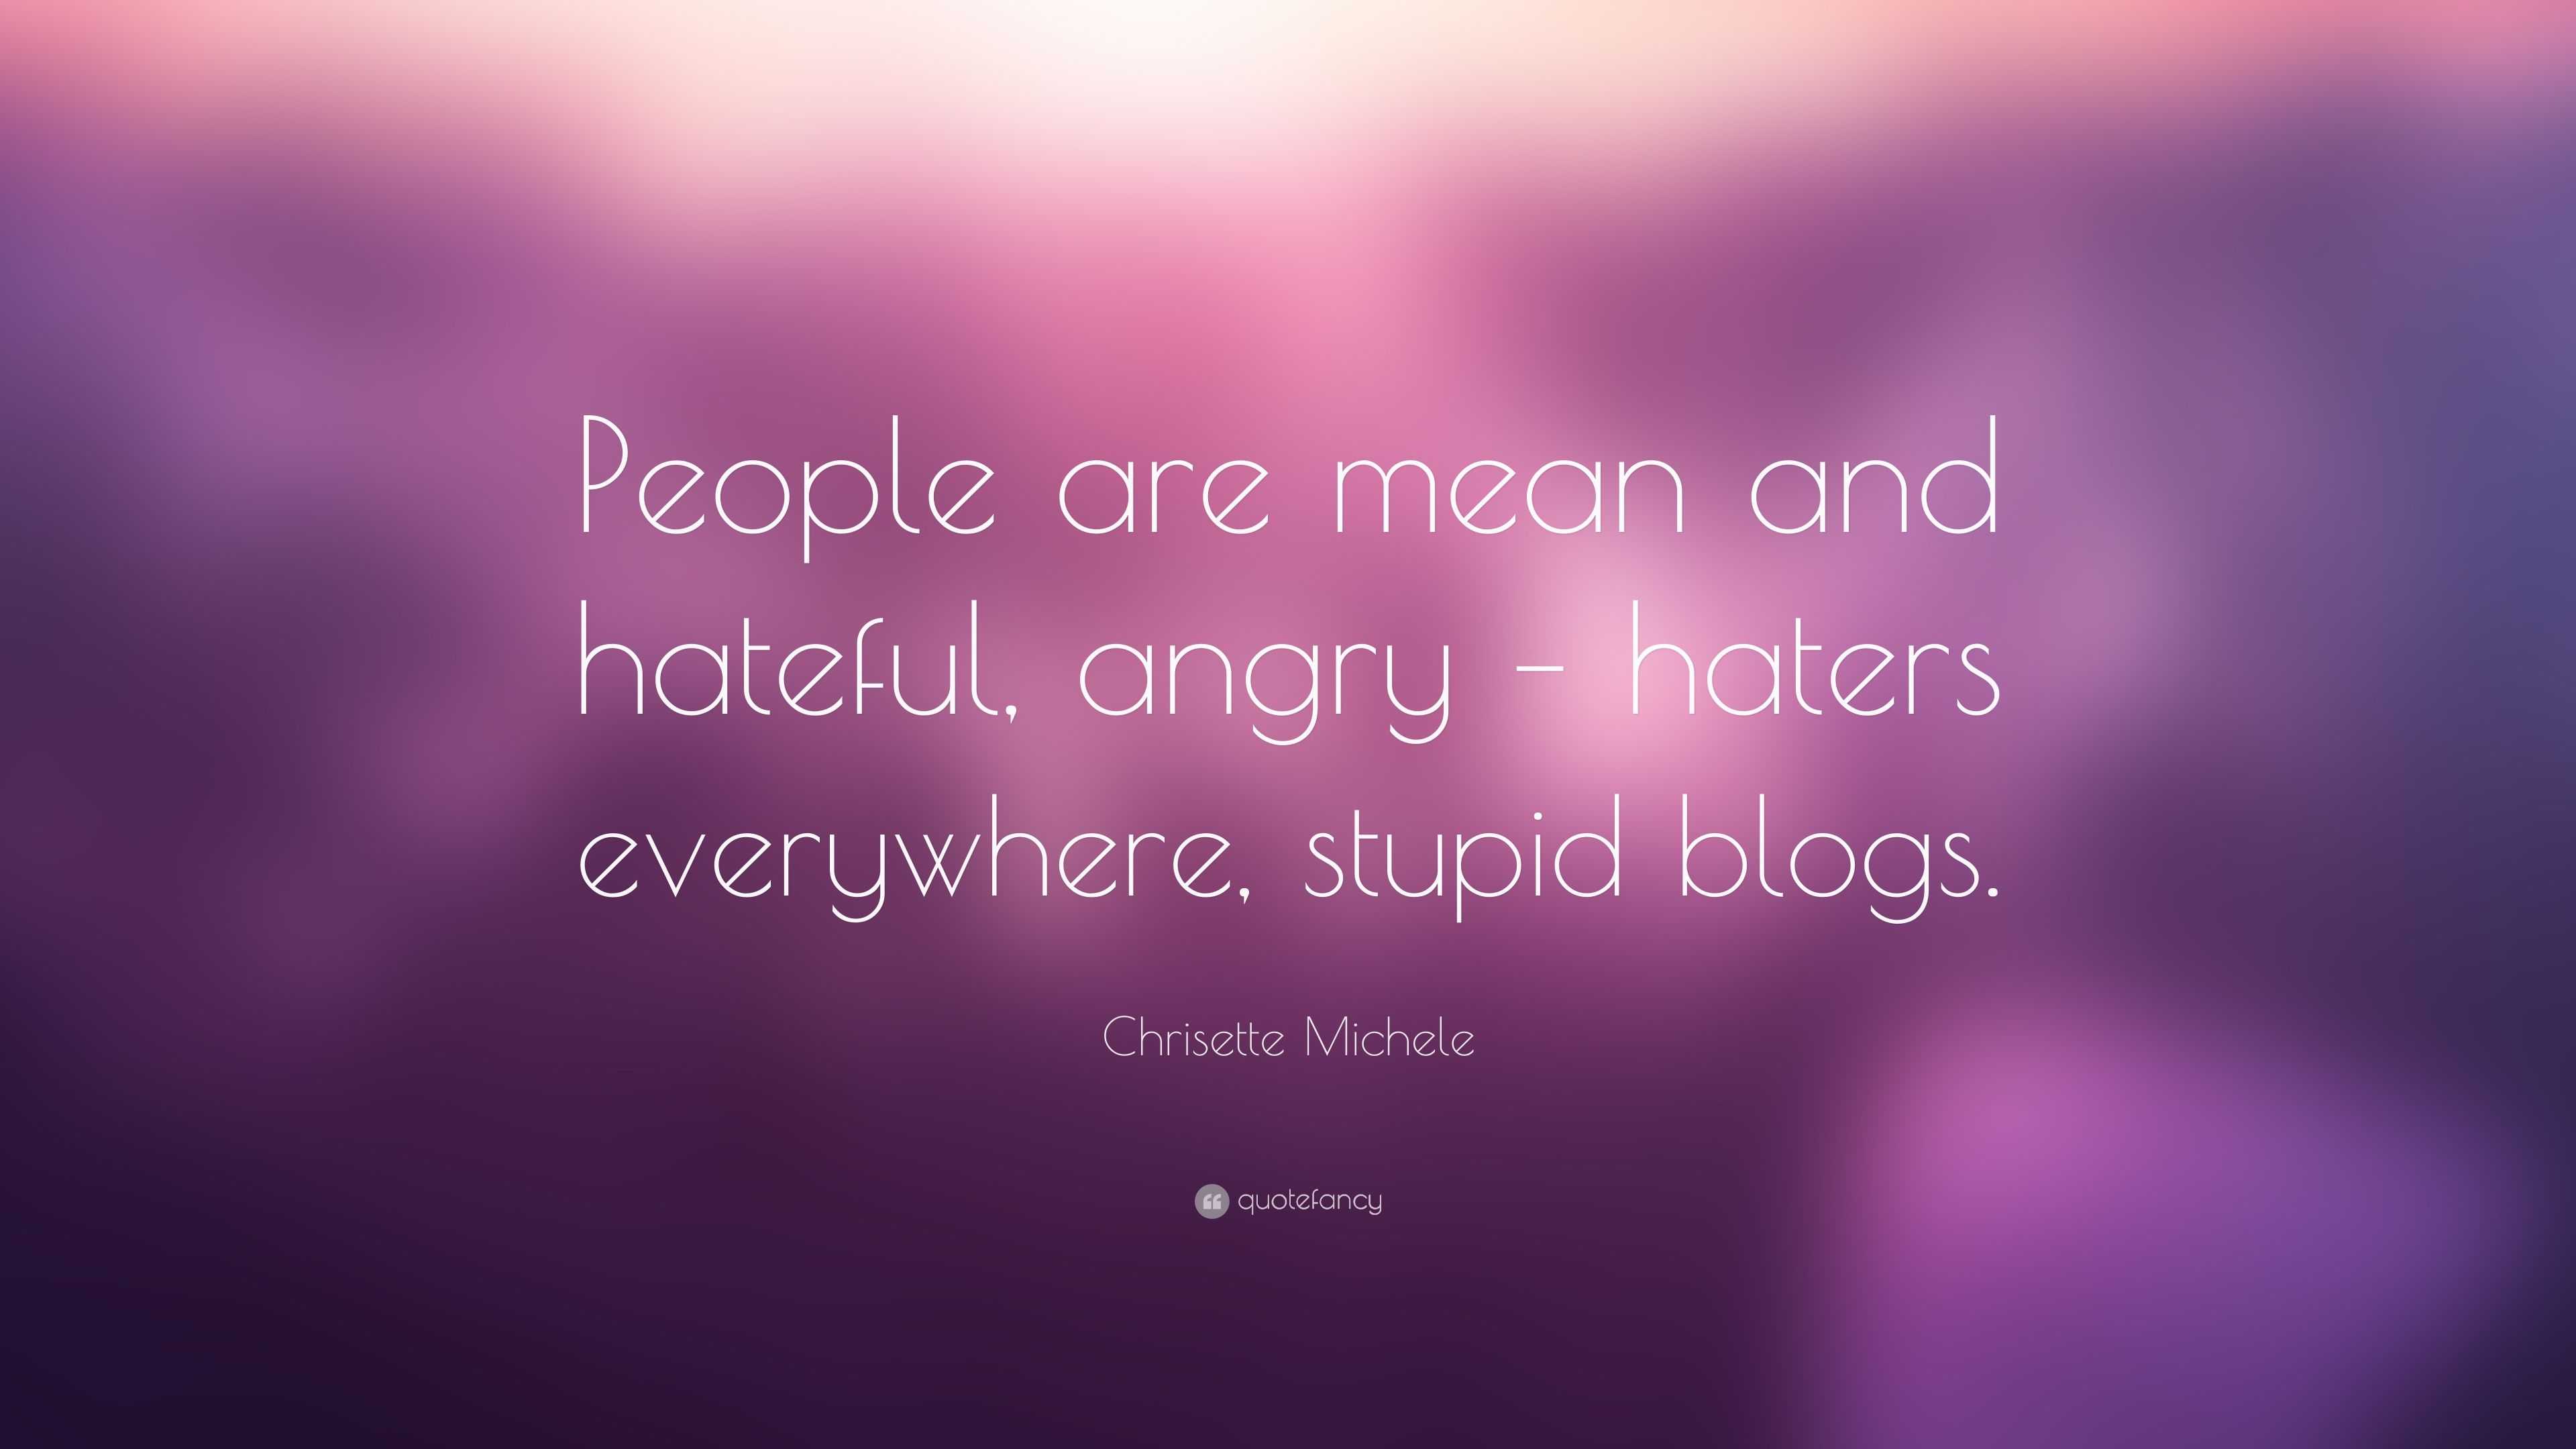 mean quotes and sayings about people